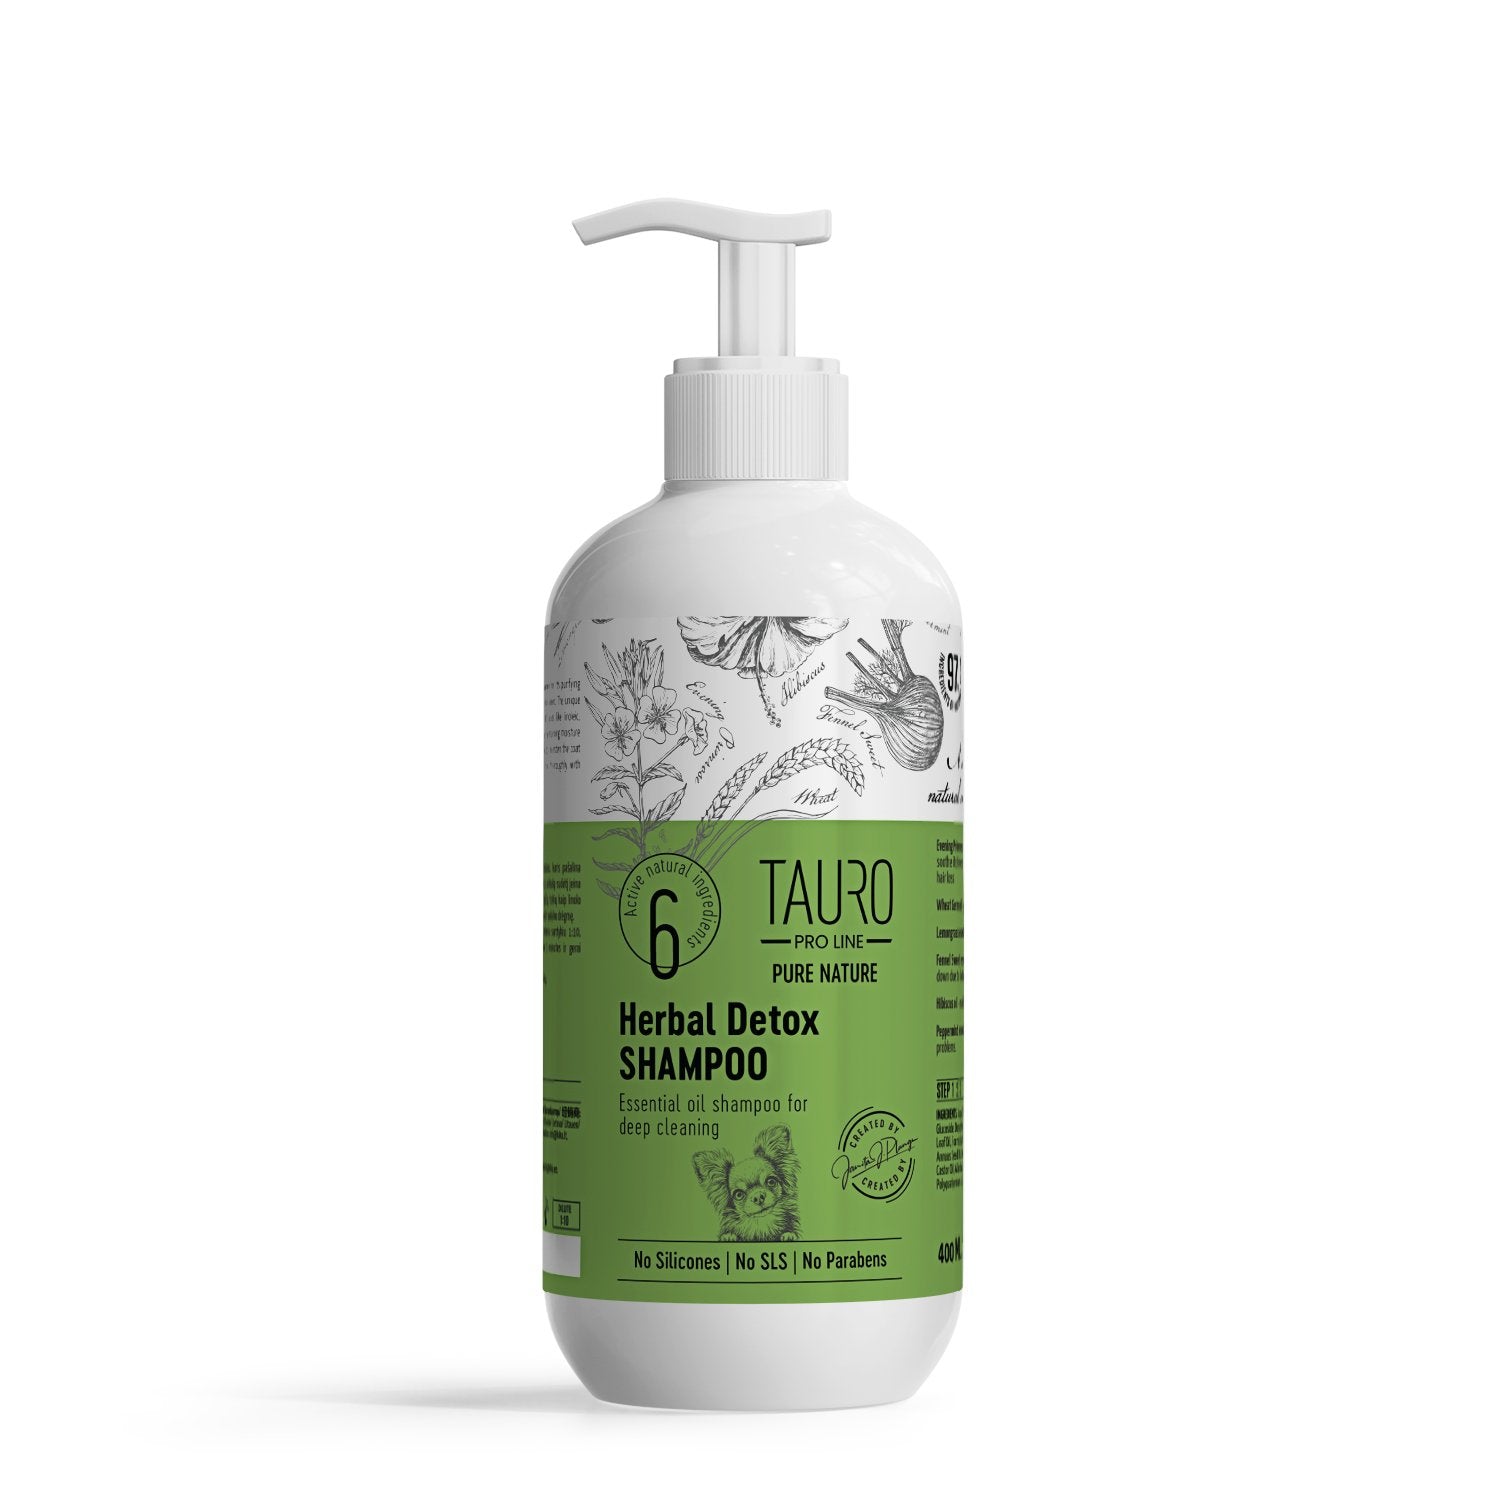 from online Line Pro Tauro your brand, Pro Tauro Shampoo: Line Buy favorite shampoo